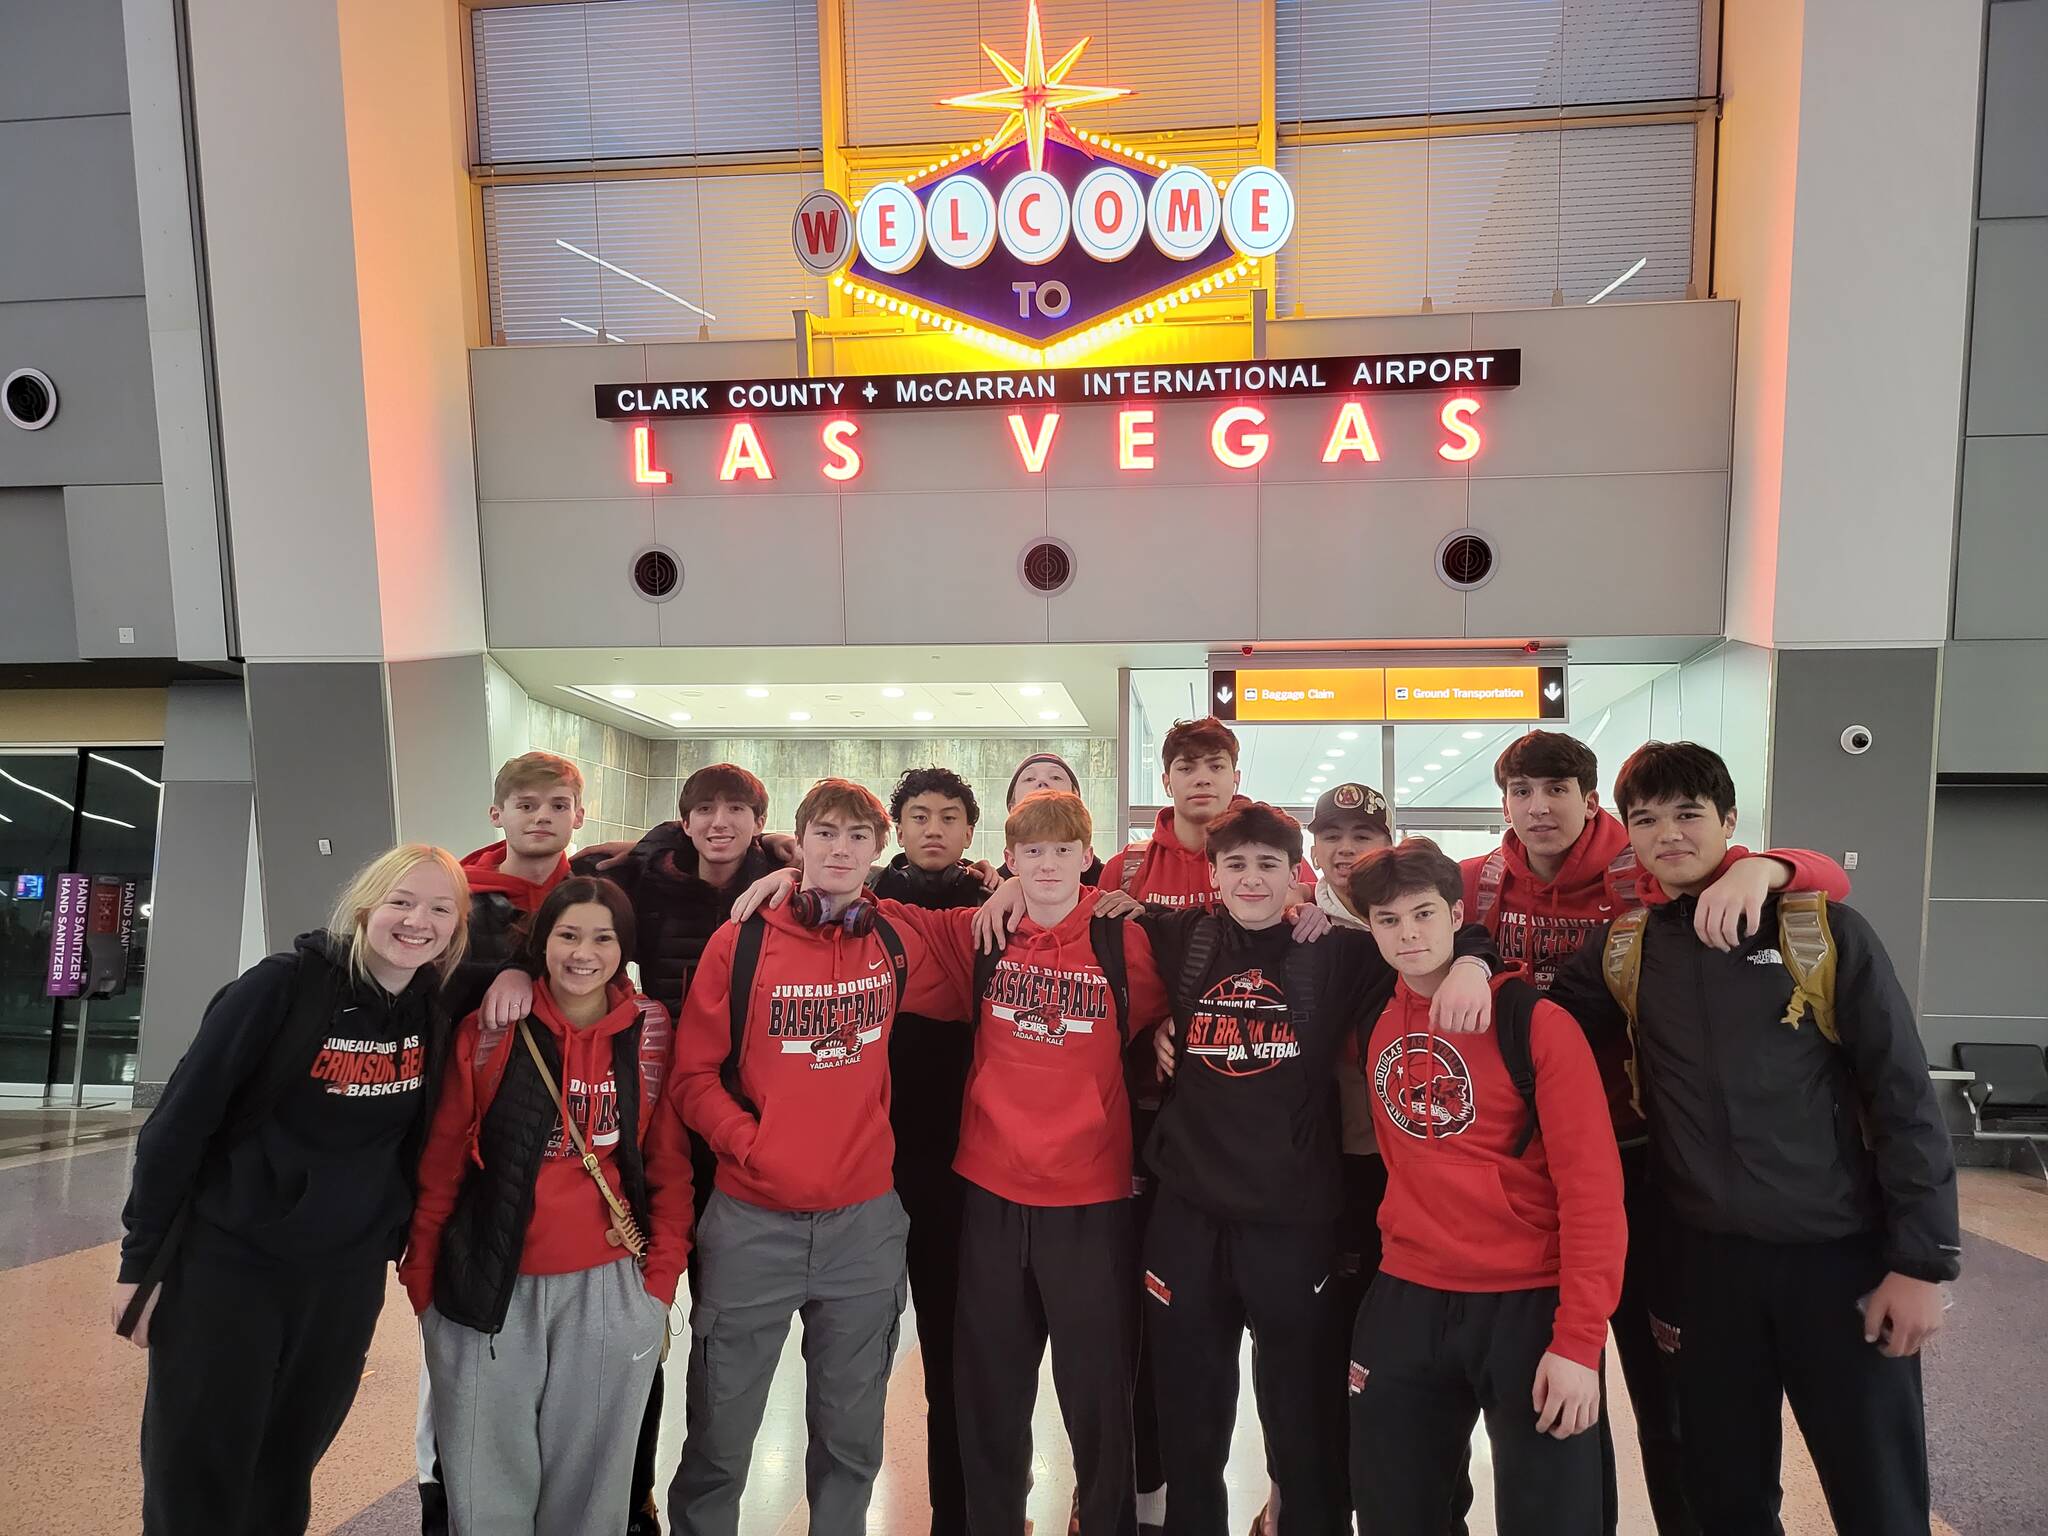 JDHS boys basketball team poses for a group photo on Monday in Las Vegas for the Tarkanian Classic tournament. (Courtesy Photo / Robert Casperson)